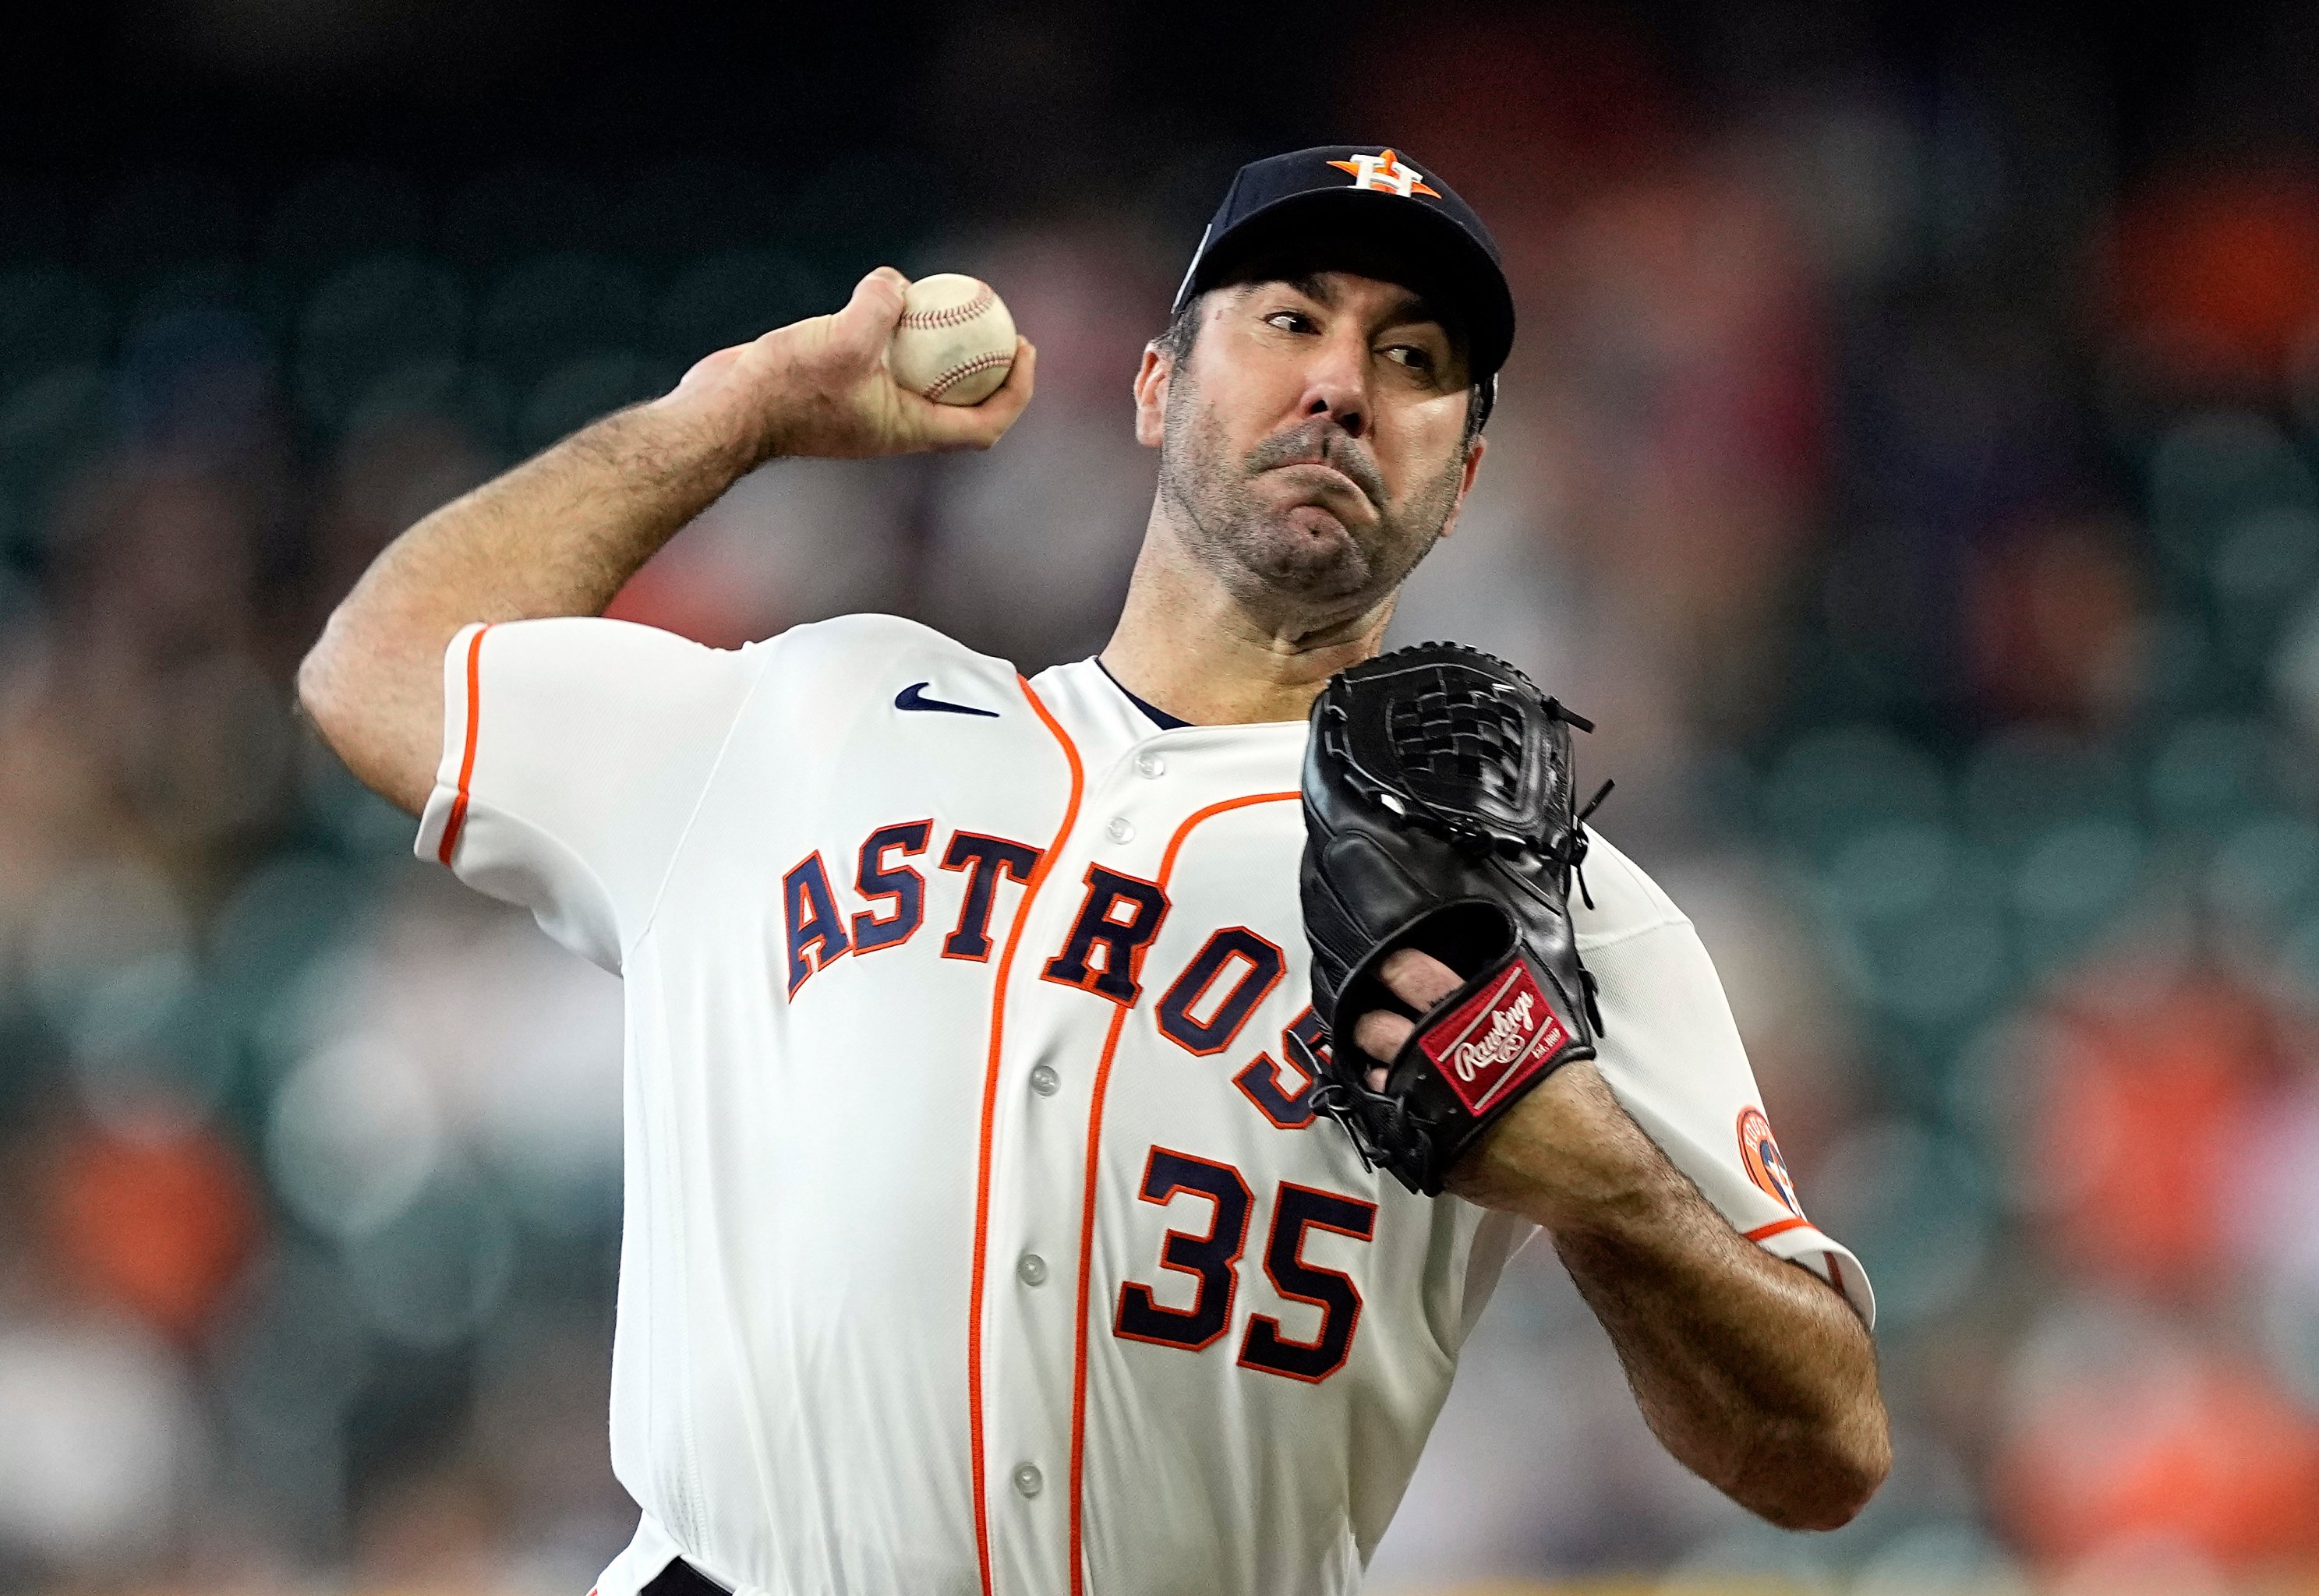 Mets' Justin Verlander shockingly lands on IL ahead of Opening Day game vs.  Marlins